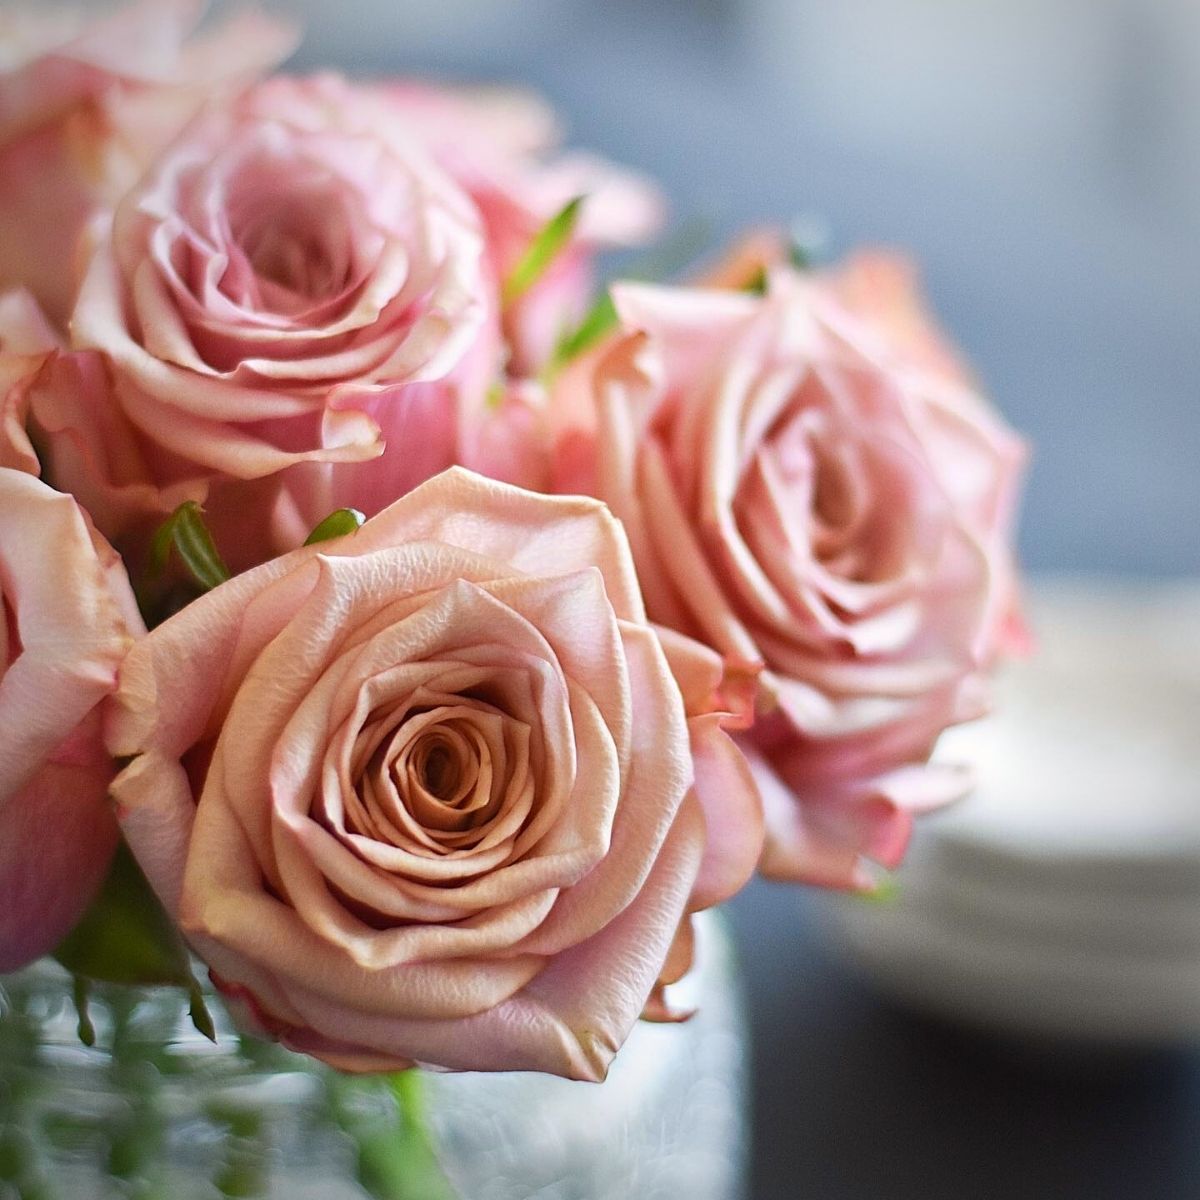 rose-moon-dust-is-2022s-rising-star-rose-among-top-floral-designers-featured